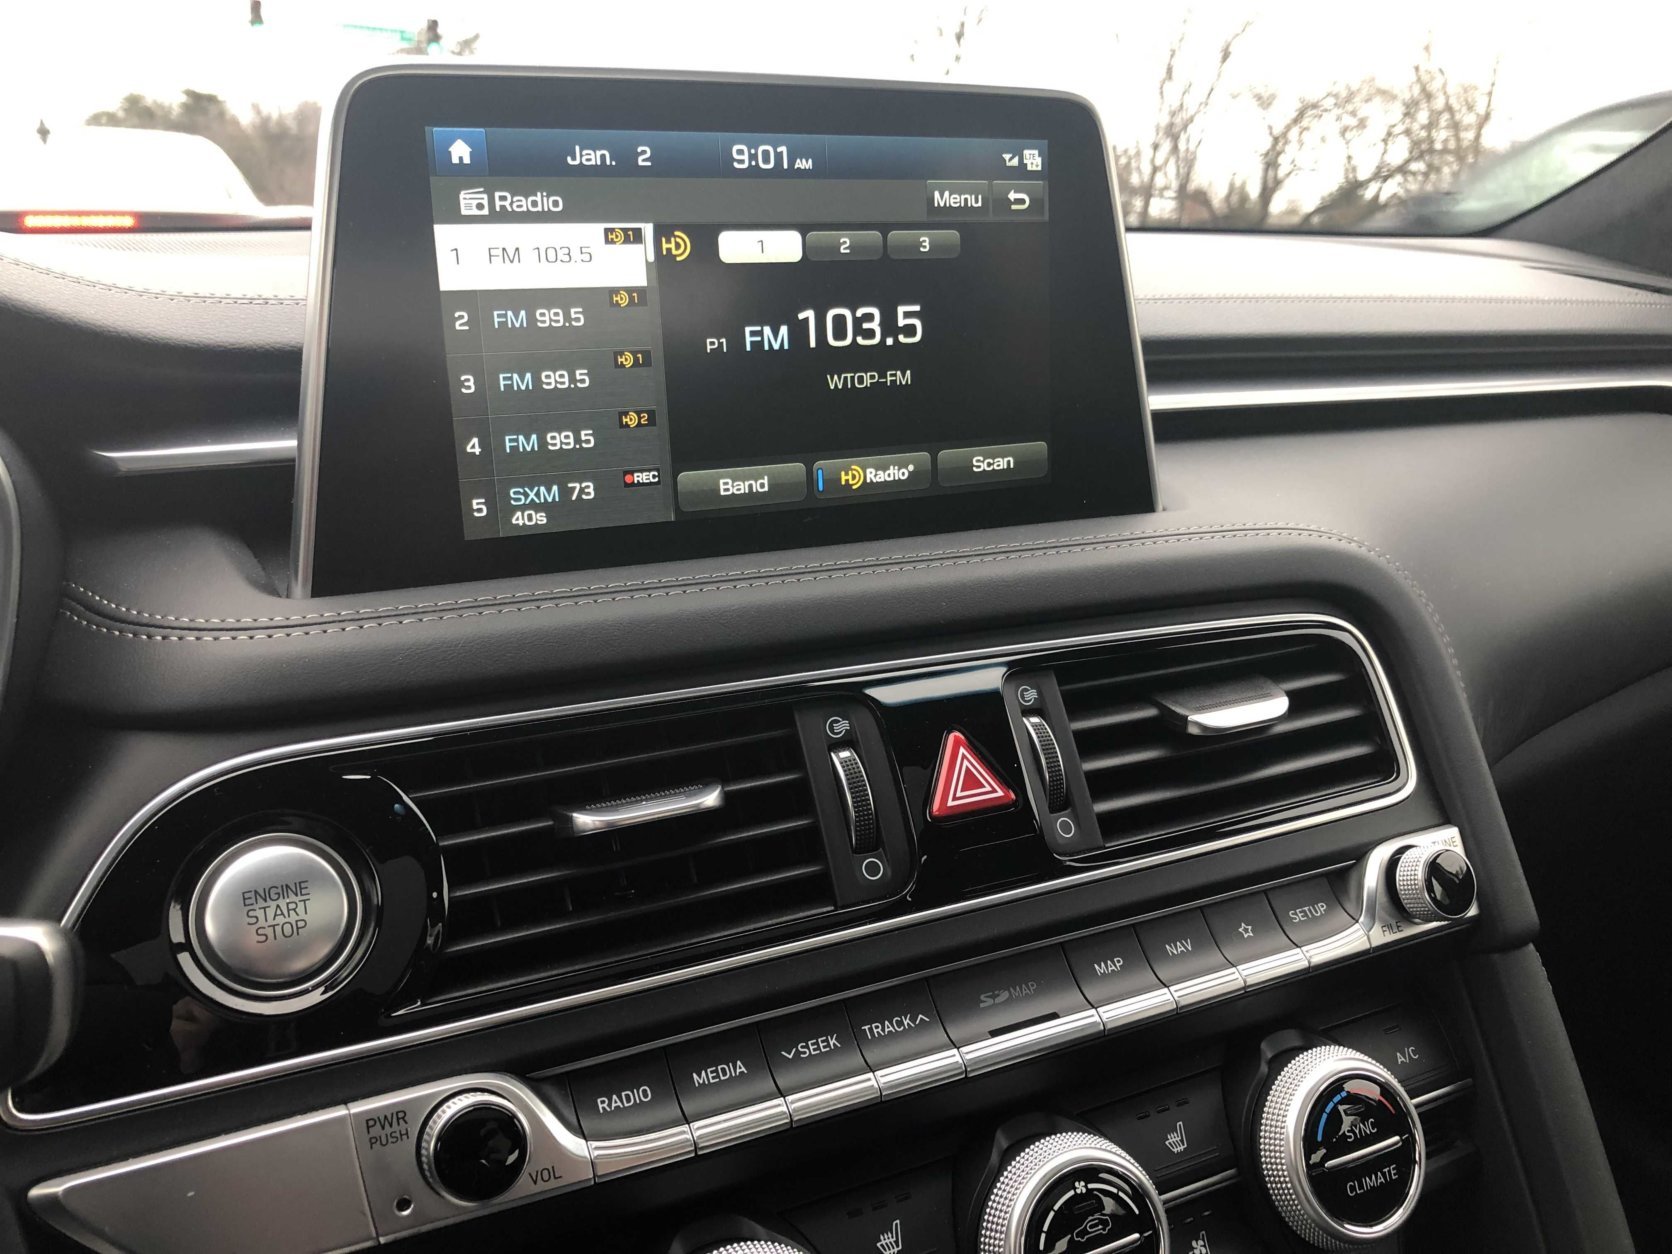 8 inch touchscreen in the 2019 Genesis G70. (WTOP/Mike Parris)